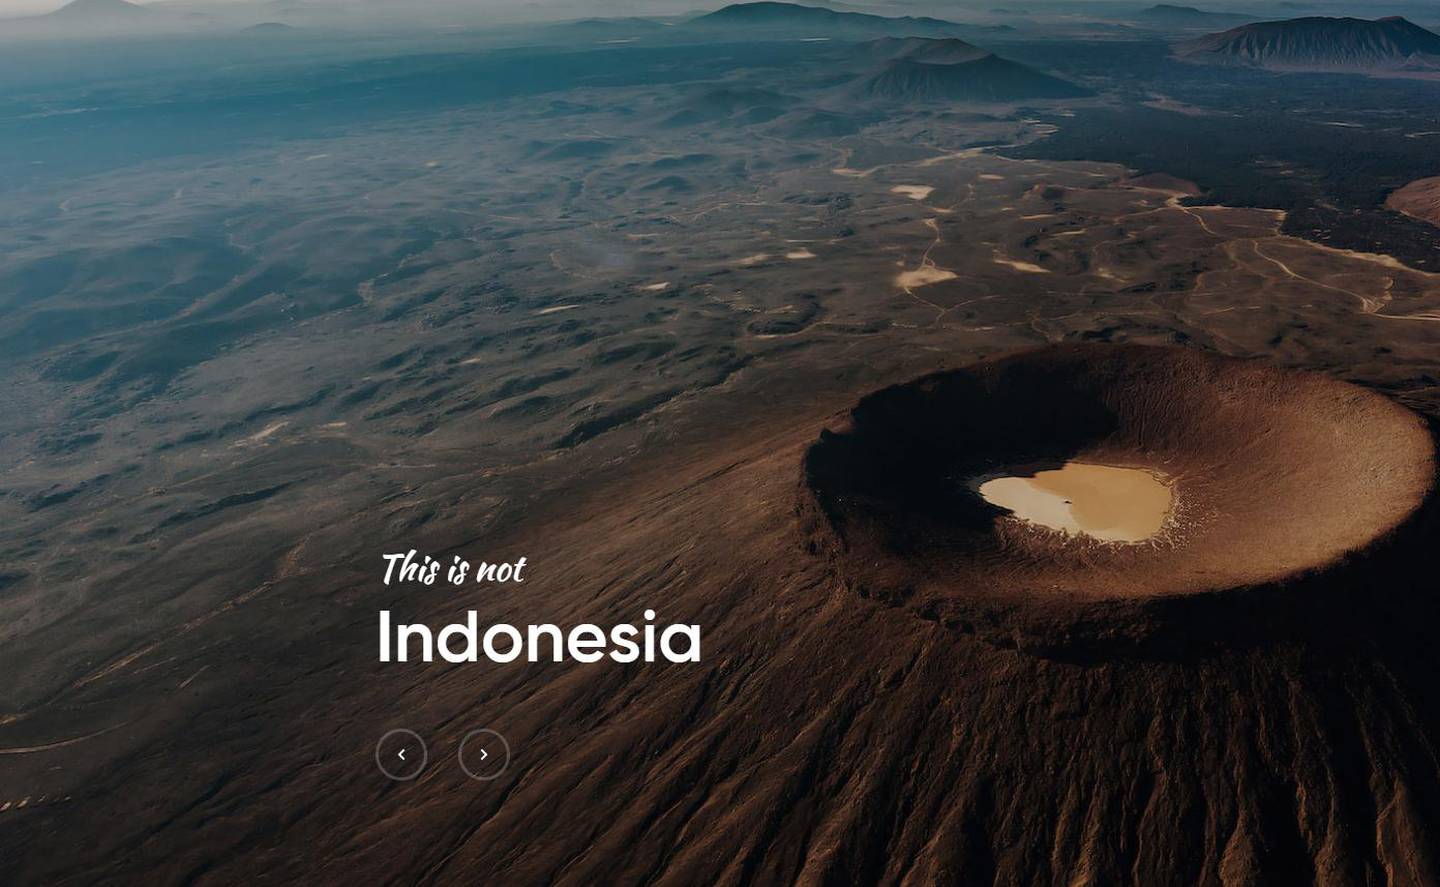 These craters look remarkably like those in Indonesia, but are actually in KSA